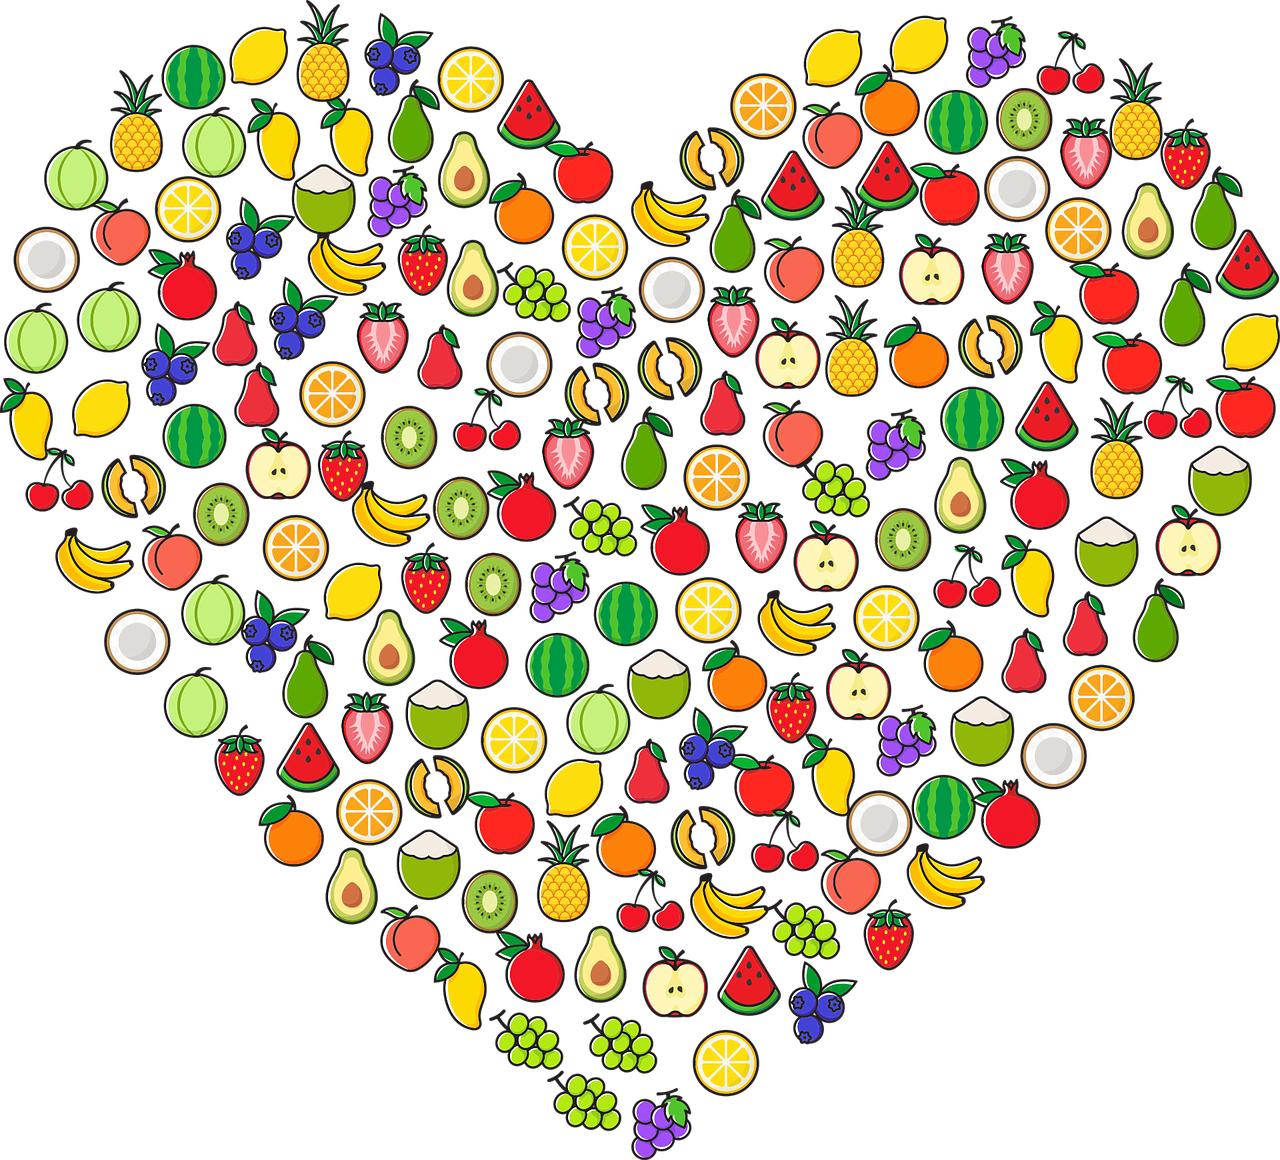 A heart made of fruit